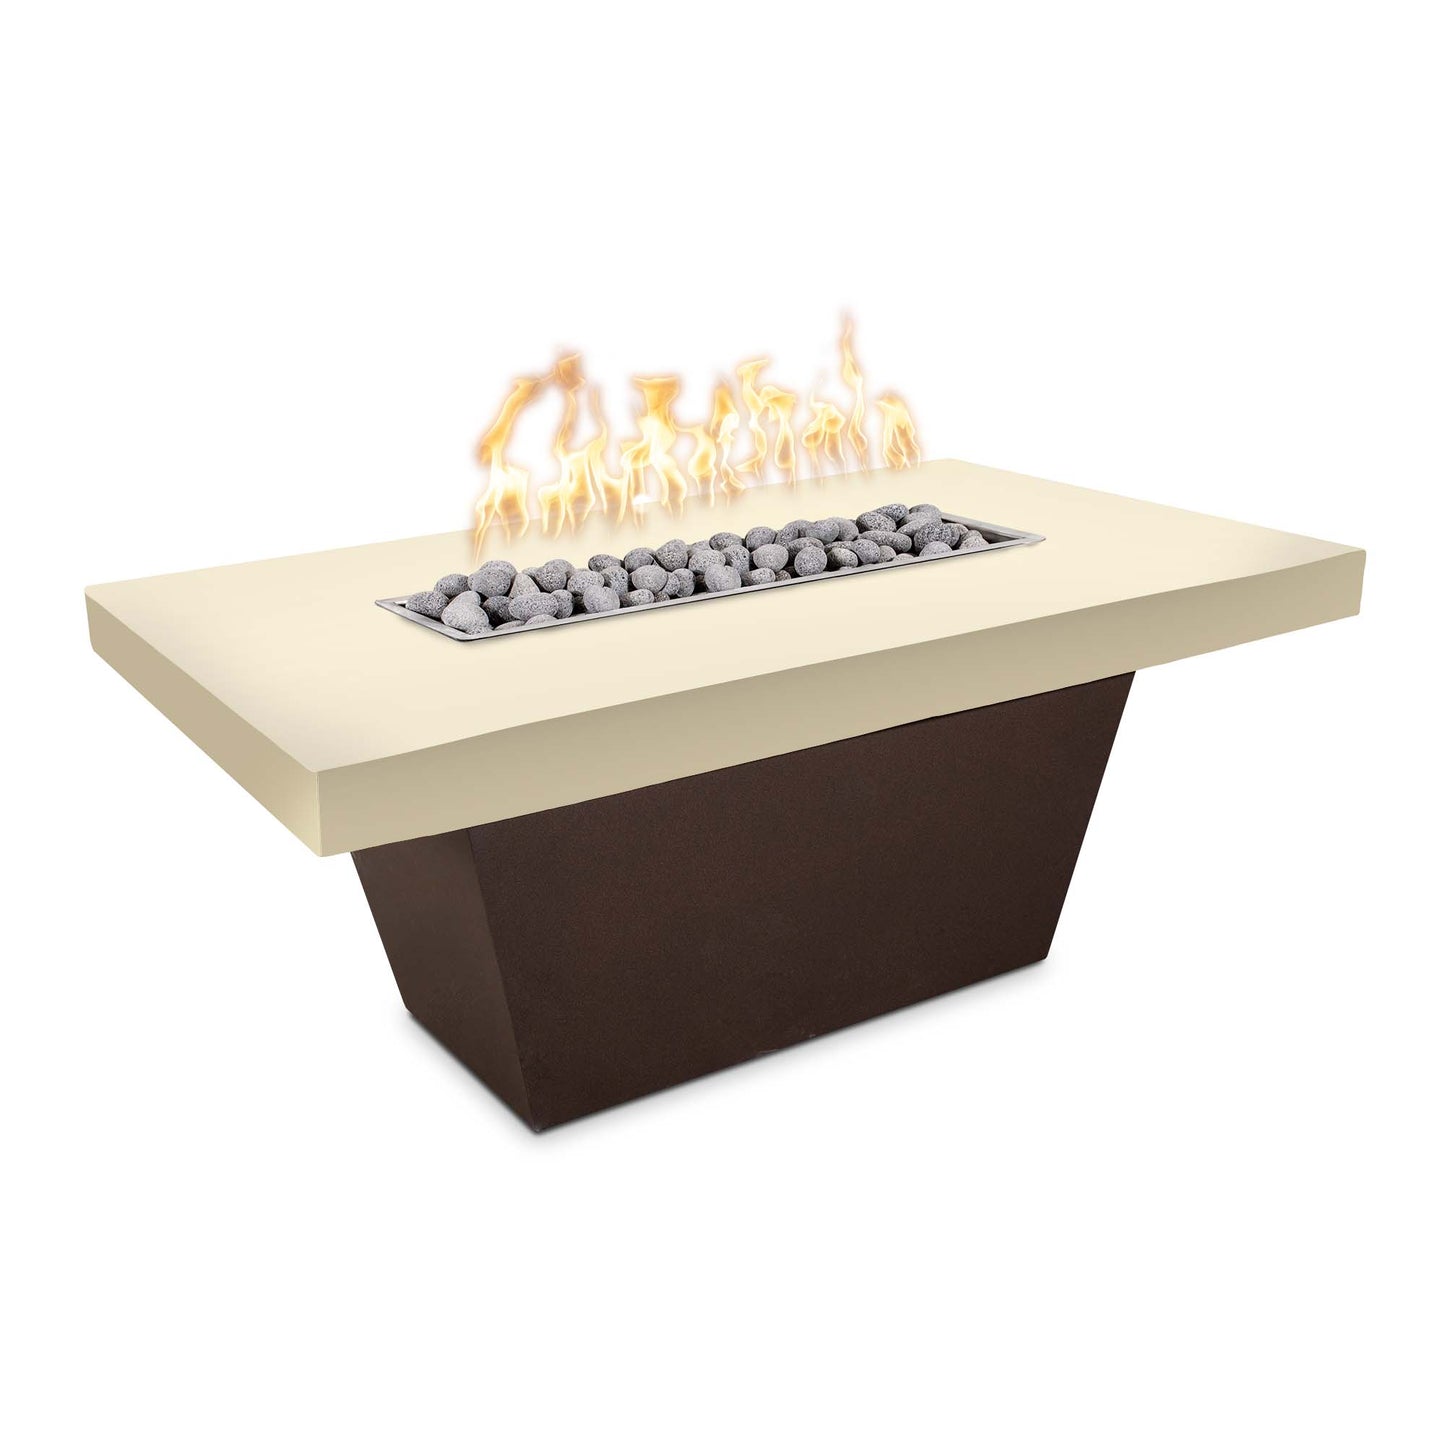 The Outdoor Plus Tacoma 48" Brown Concrete Top & White Powder Coated Base Natural Gas Fire Table with Match Lit Ignition